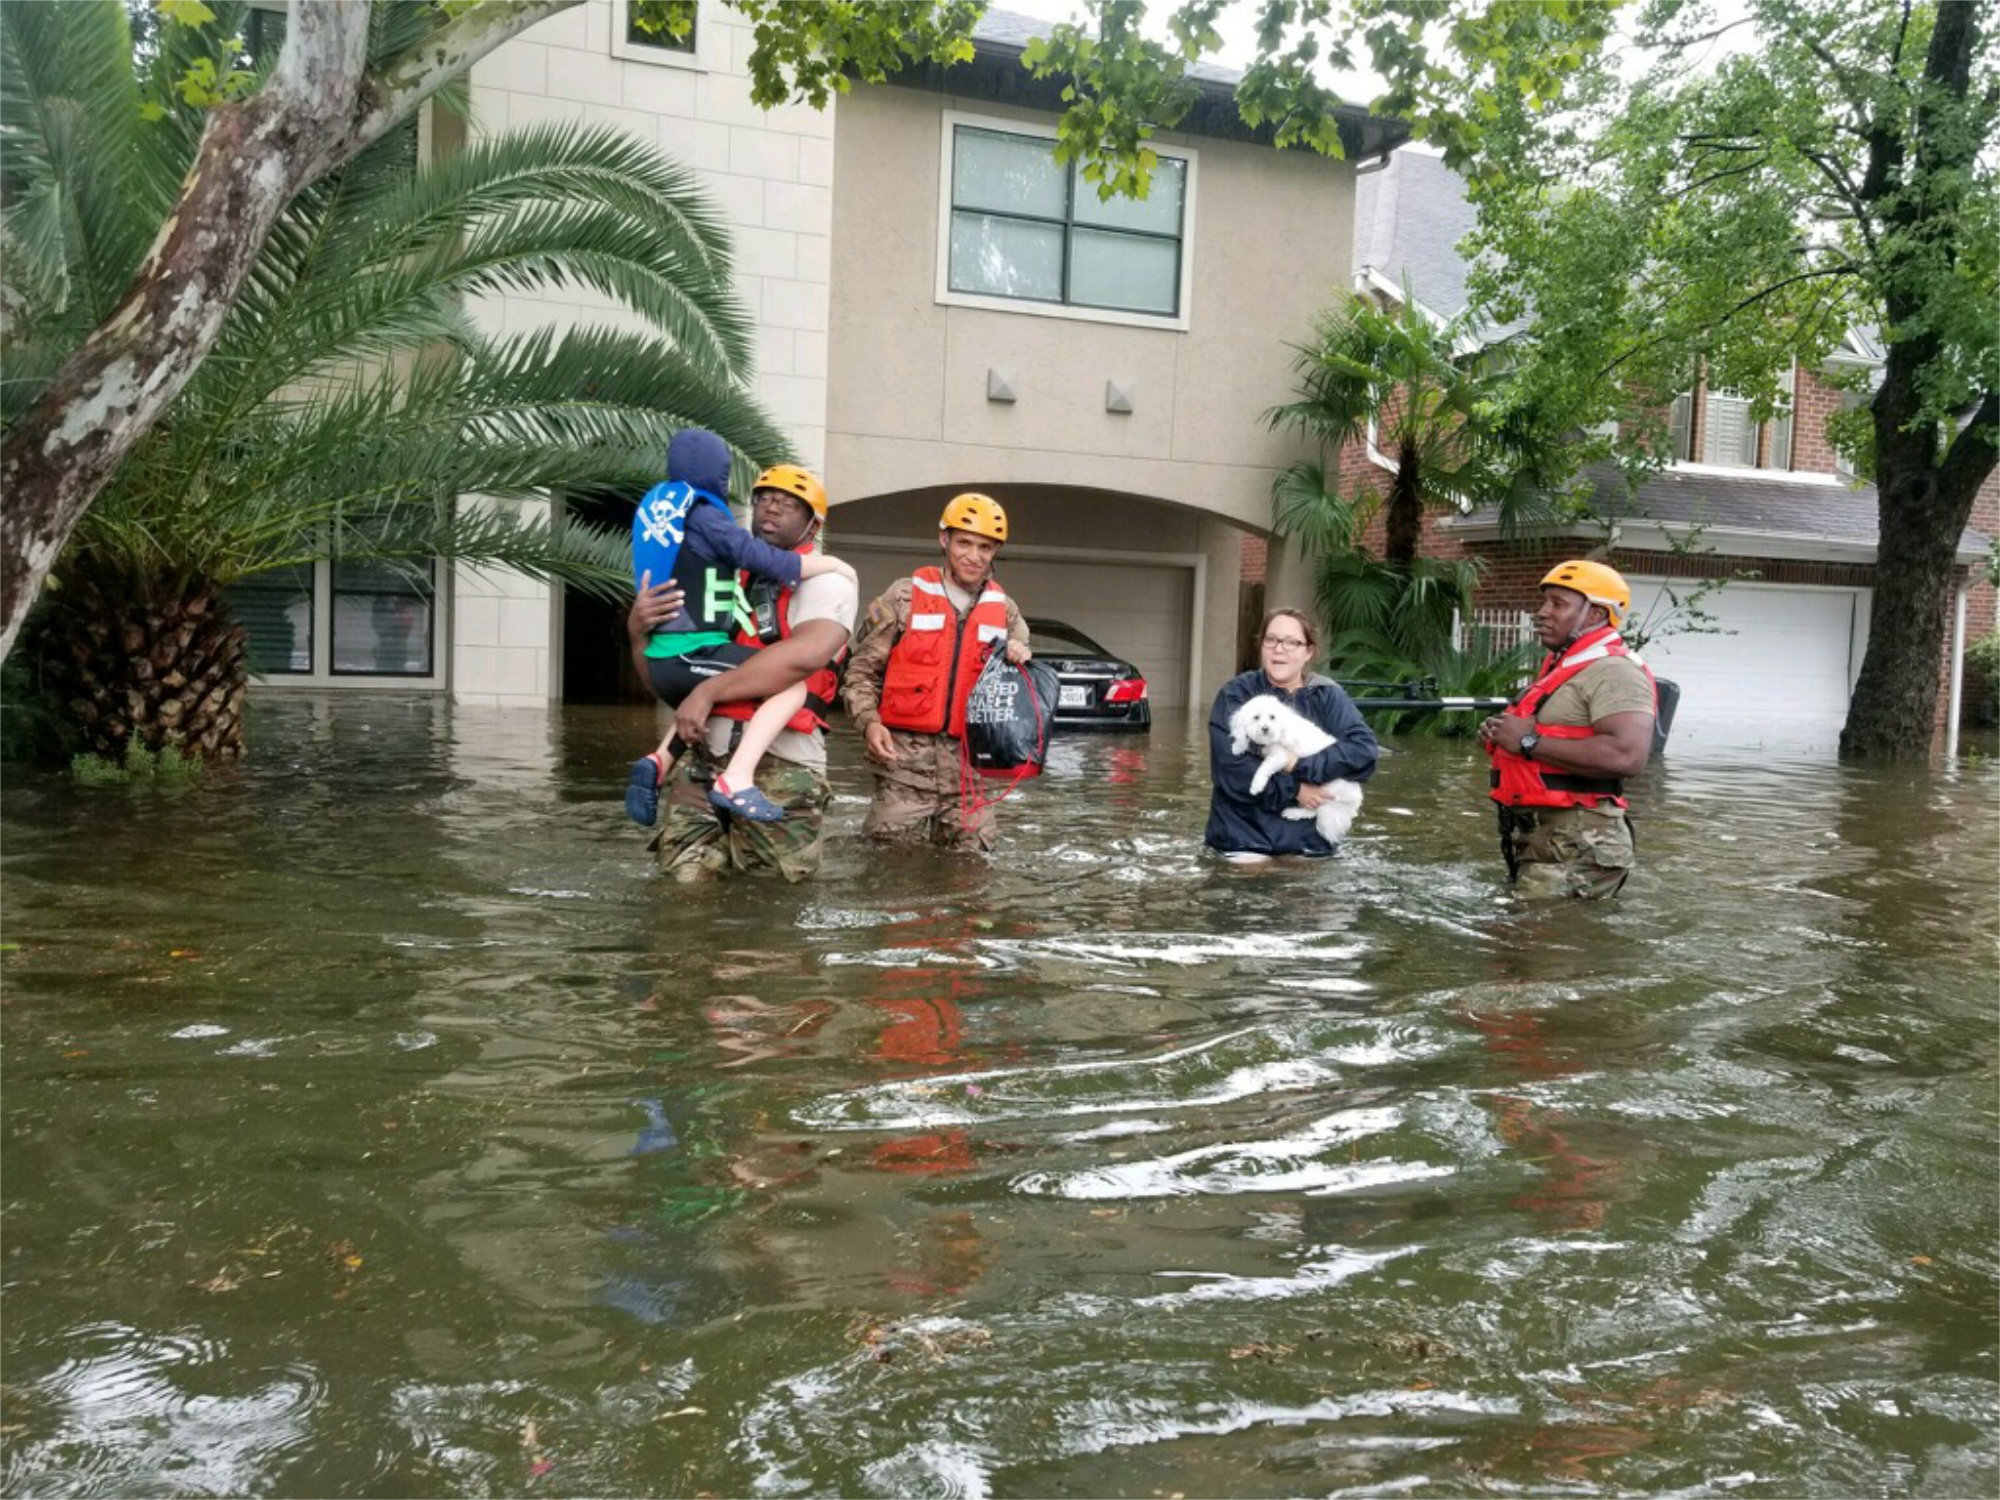 Photograph of the Texas National Guard helping people during Hurricane Harvey.